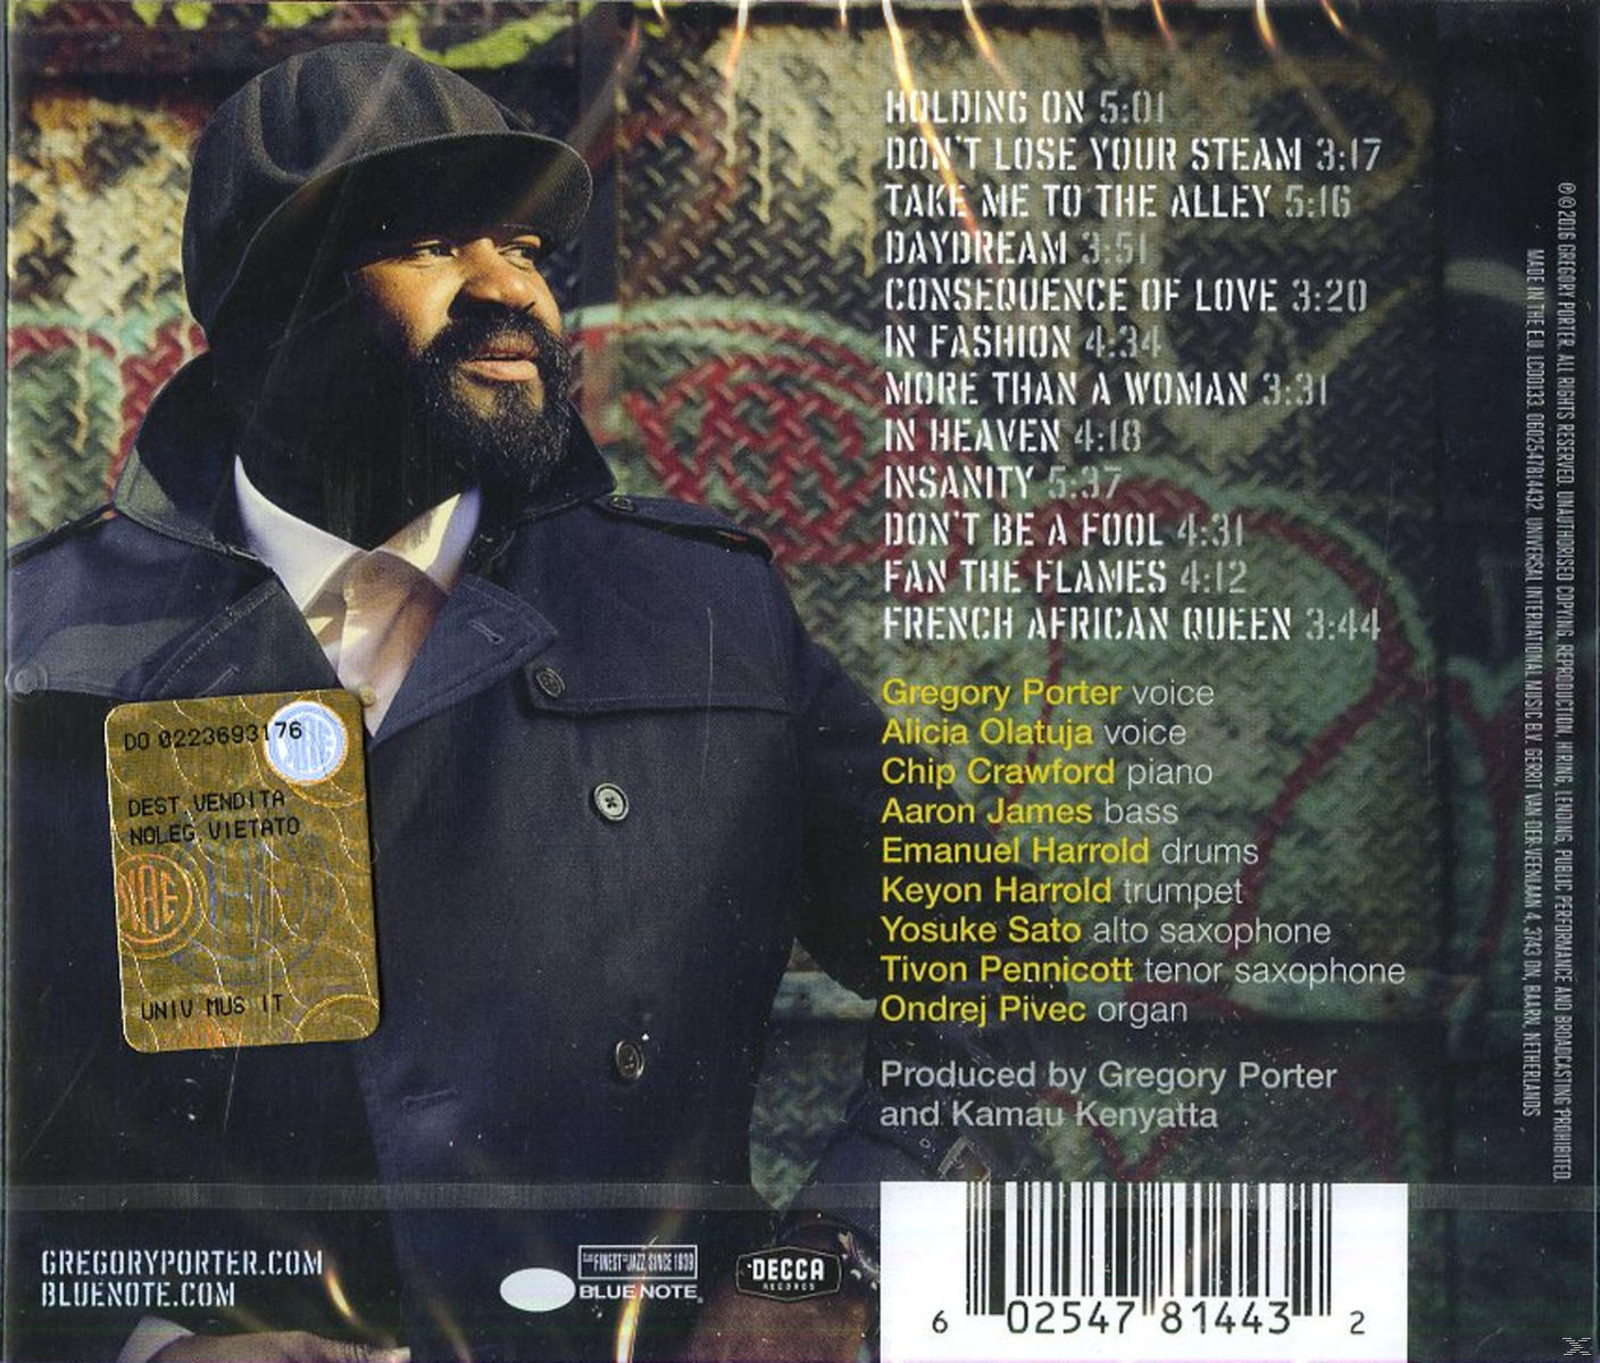 Gregory Porter - Take Me To The Alley - (CD) | eBay